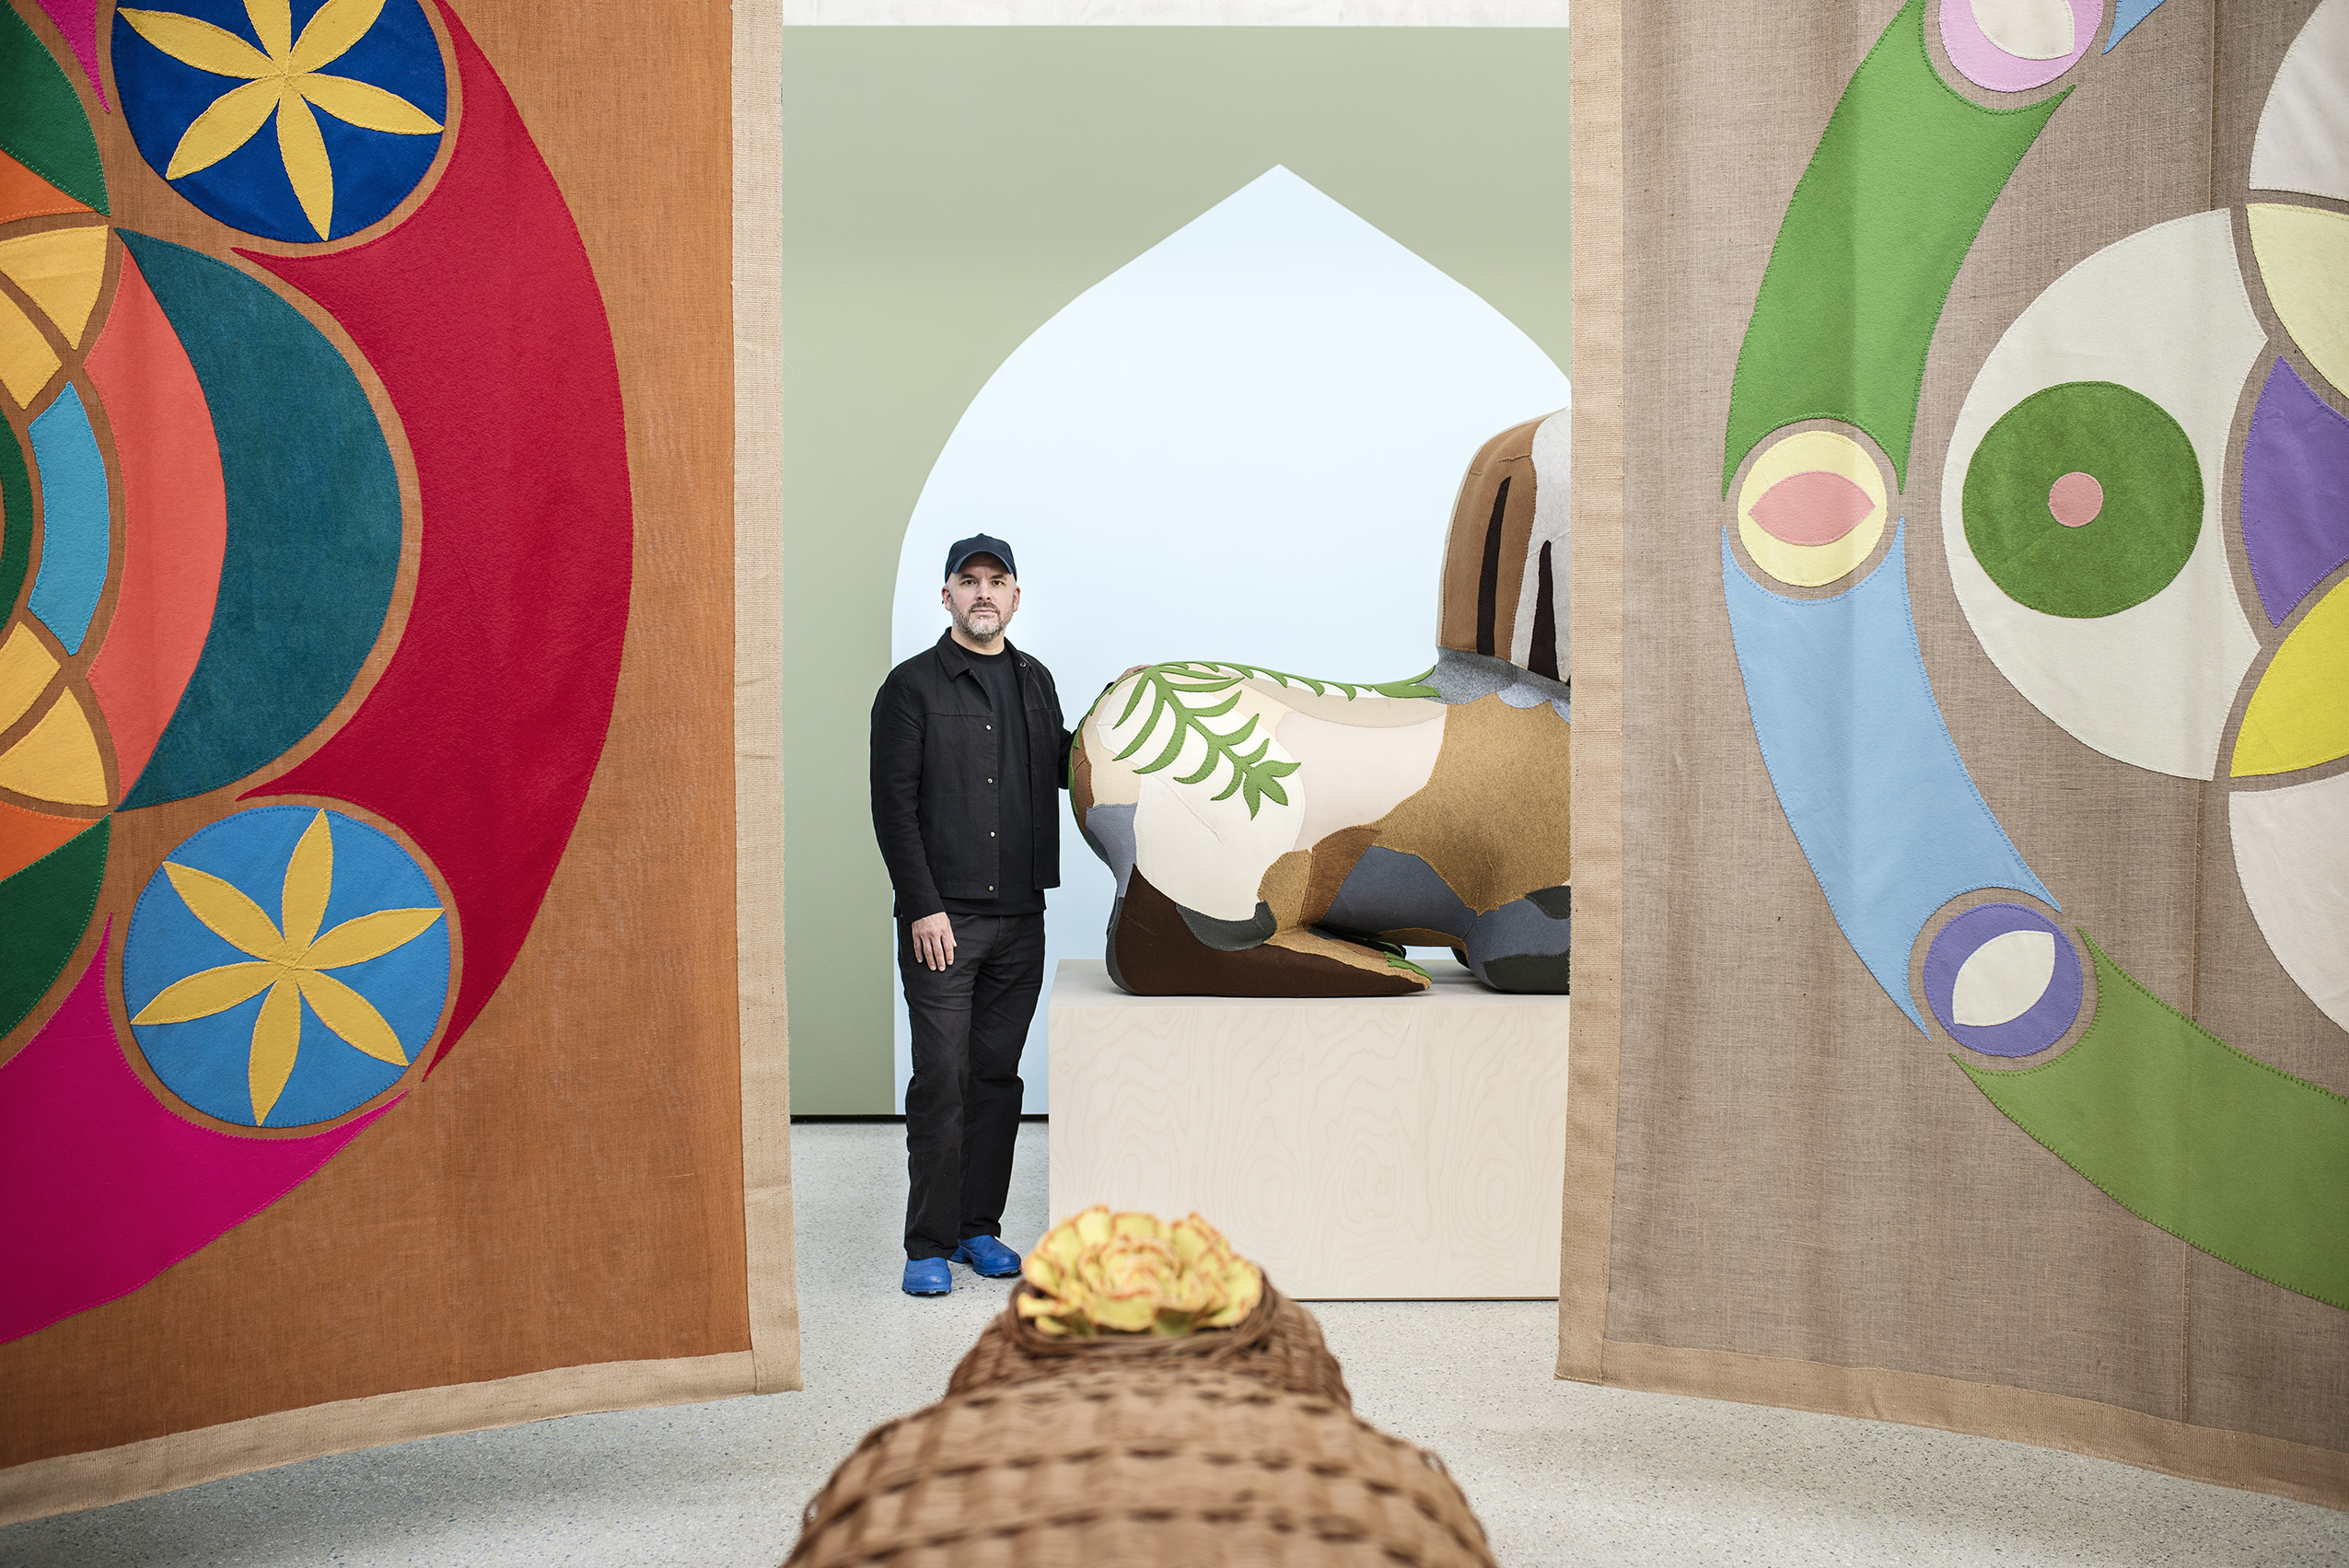 A man wearing black trousers and jacket, standing between two colourful fabric wall hangings in a gallery space.